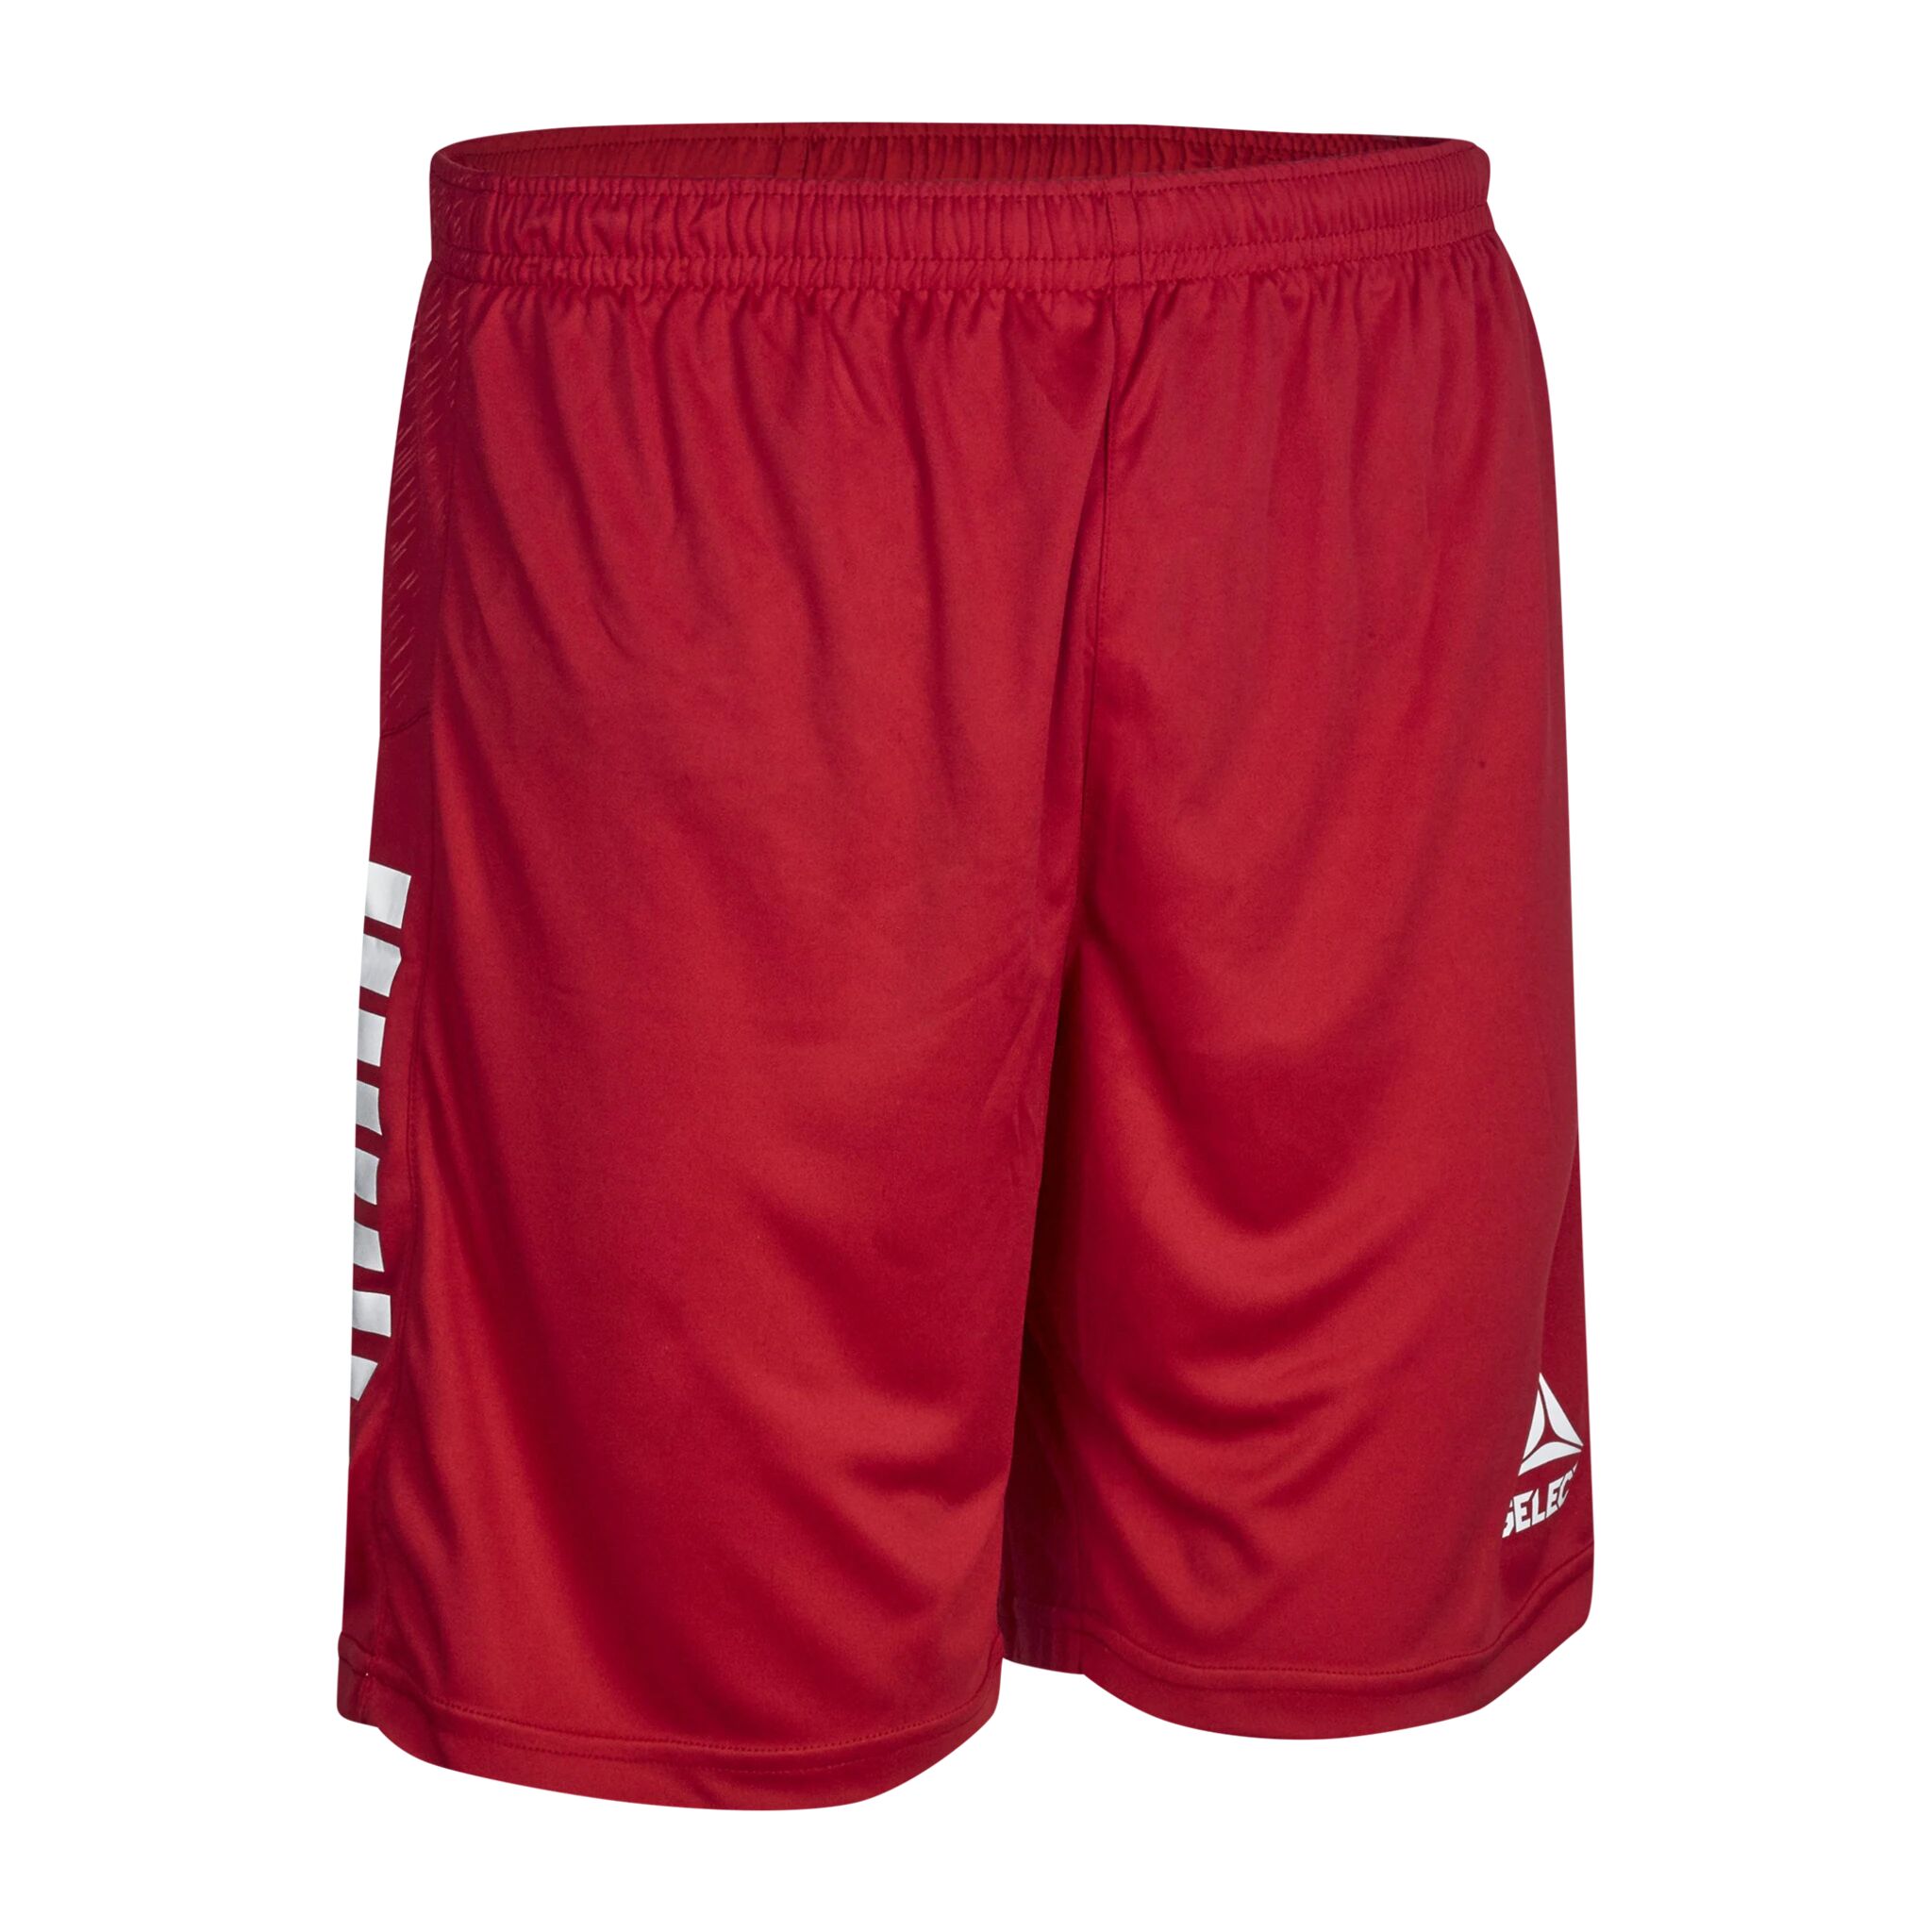 Select Player shorts Spain, shorts unisex M RED